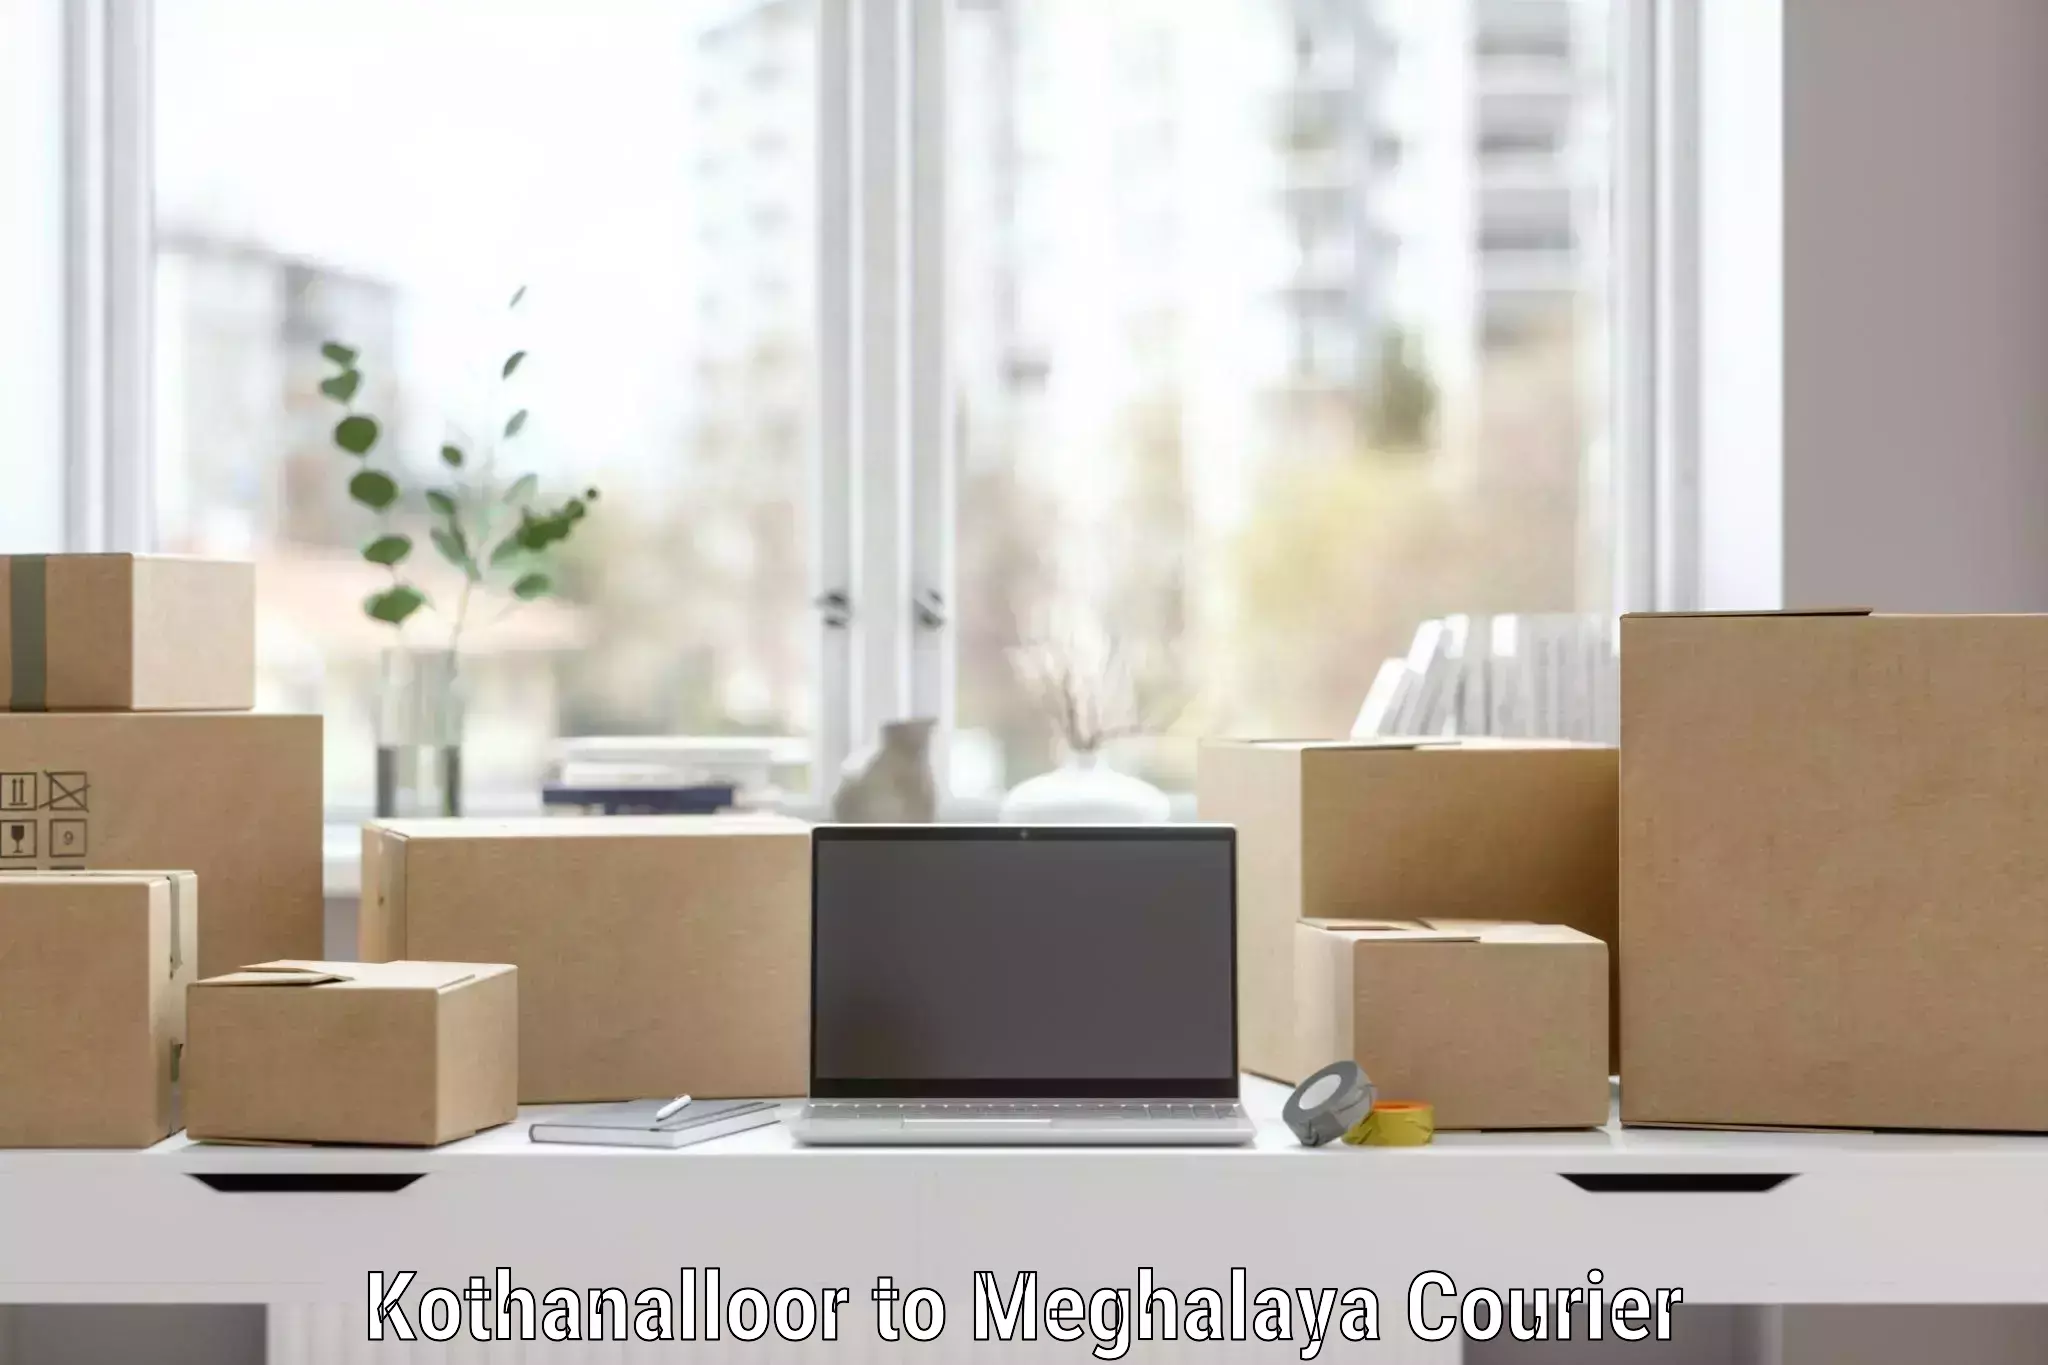 Quality relocation services Kothanalloor to Meghalaya